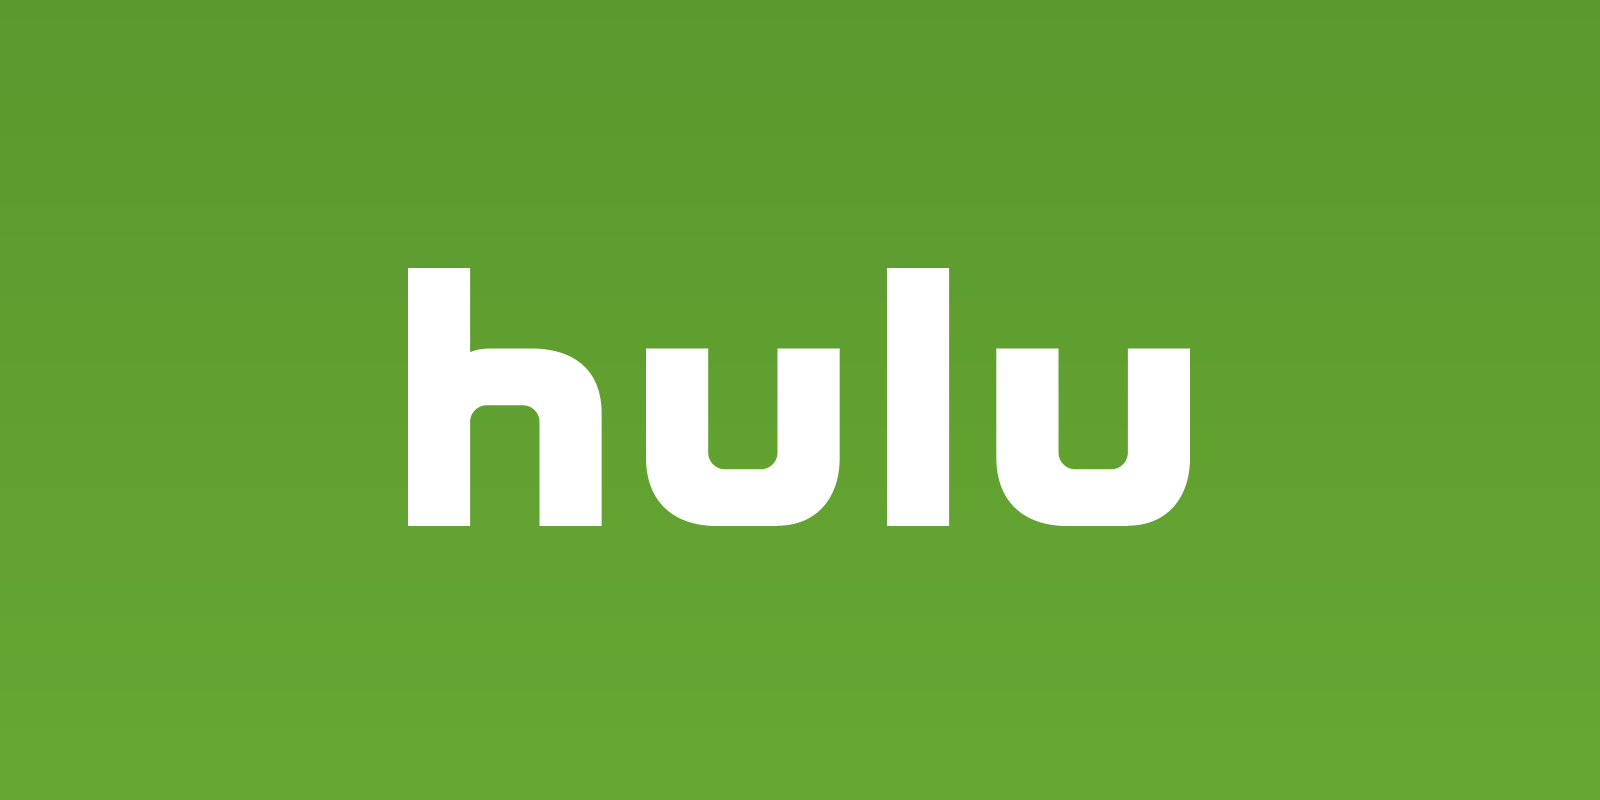 Hulu iOS app gets lock-screen controls for Chromecast, drops support for iOS 10 entirely